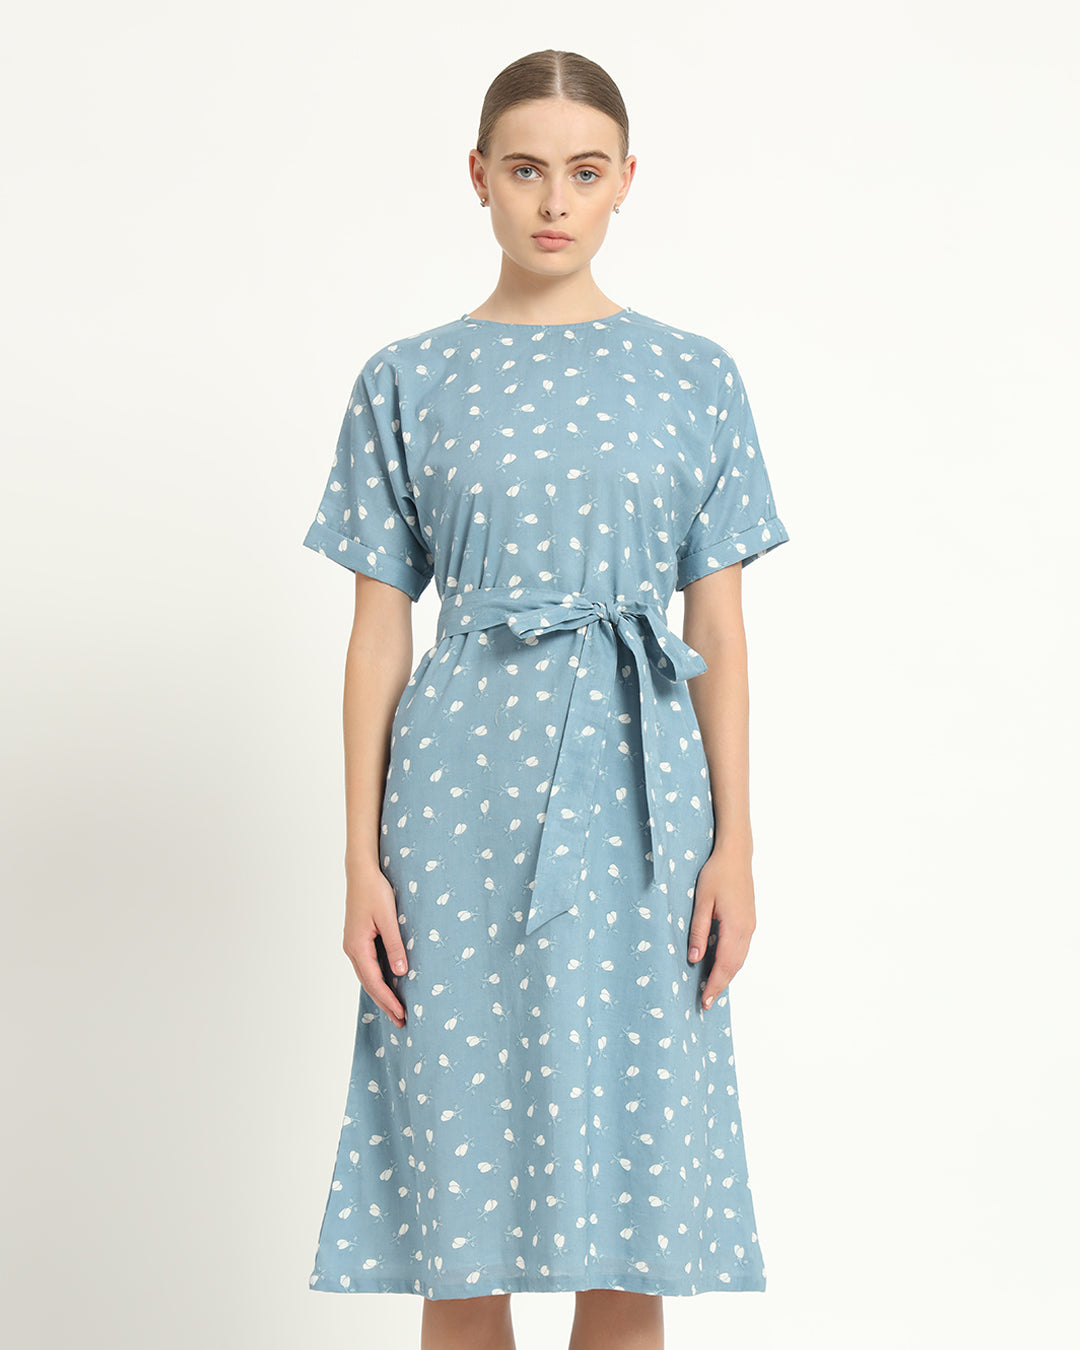 The Tayma Bluebell Cotton Dress